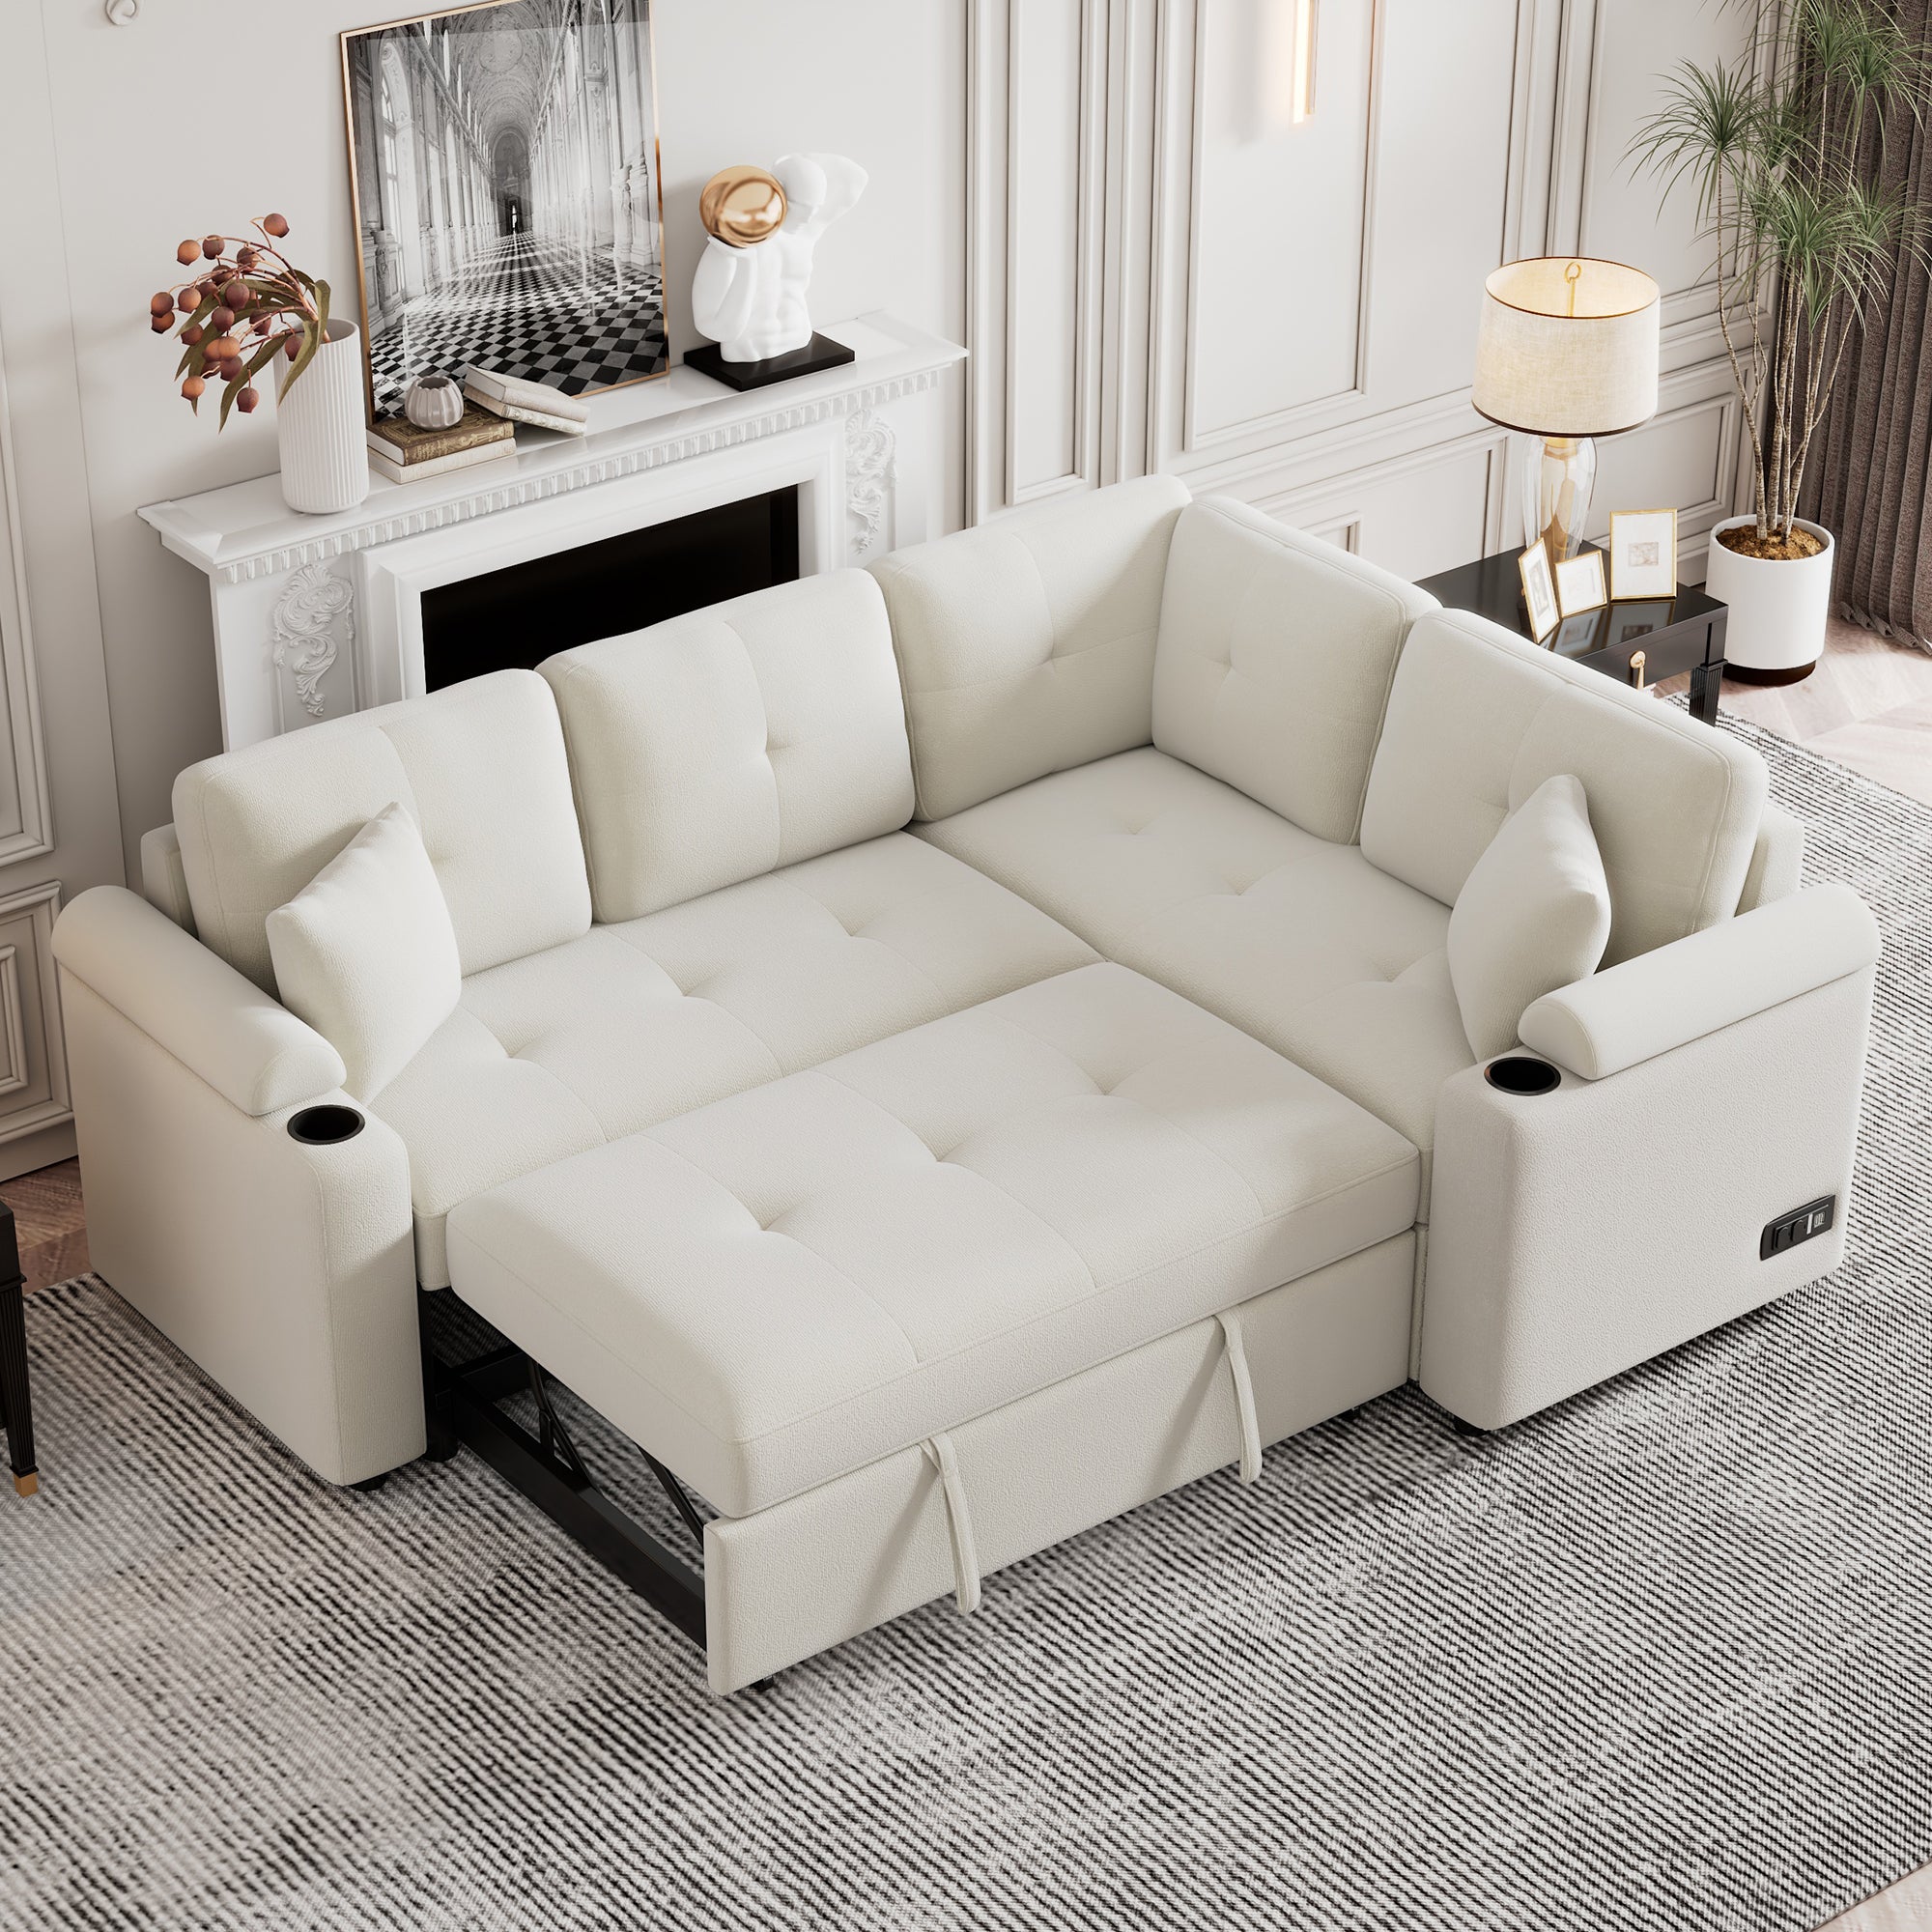 87.4" L-Shaped Boucle Sleeper Sectional Sofa - Beige - USB & Outlets-Sleeper Sectionals-American Furniture Outlet